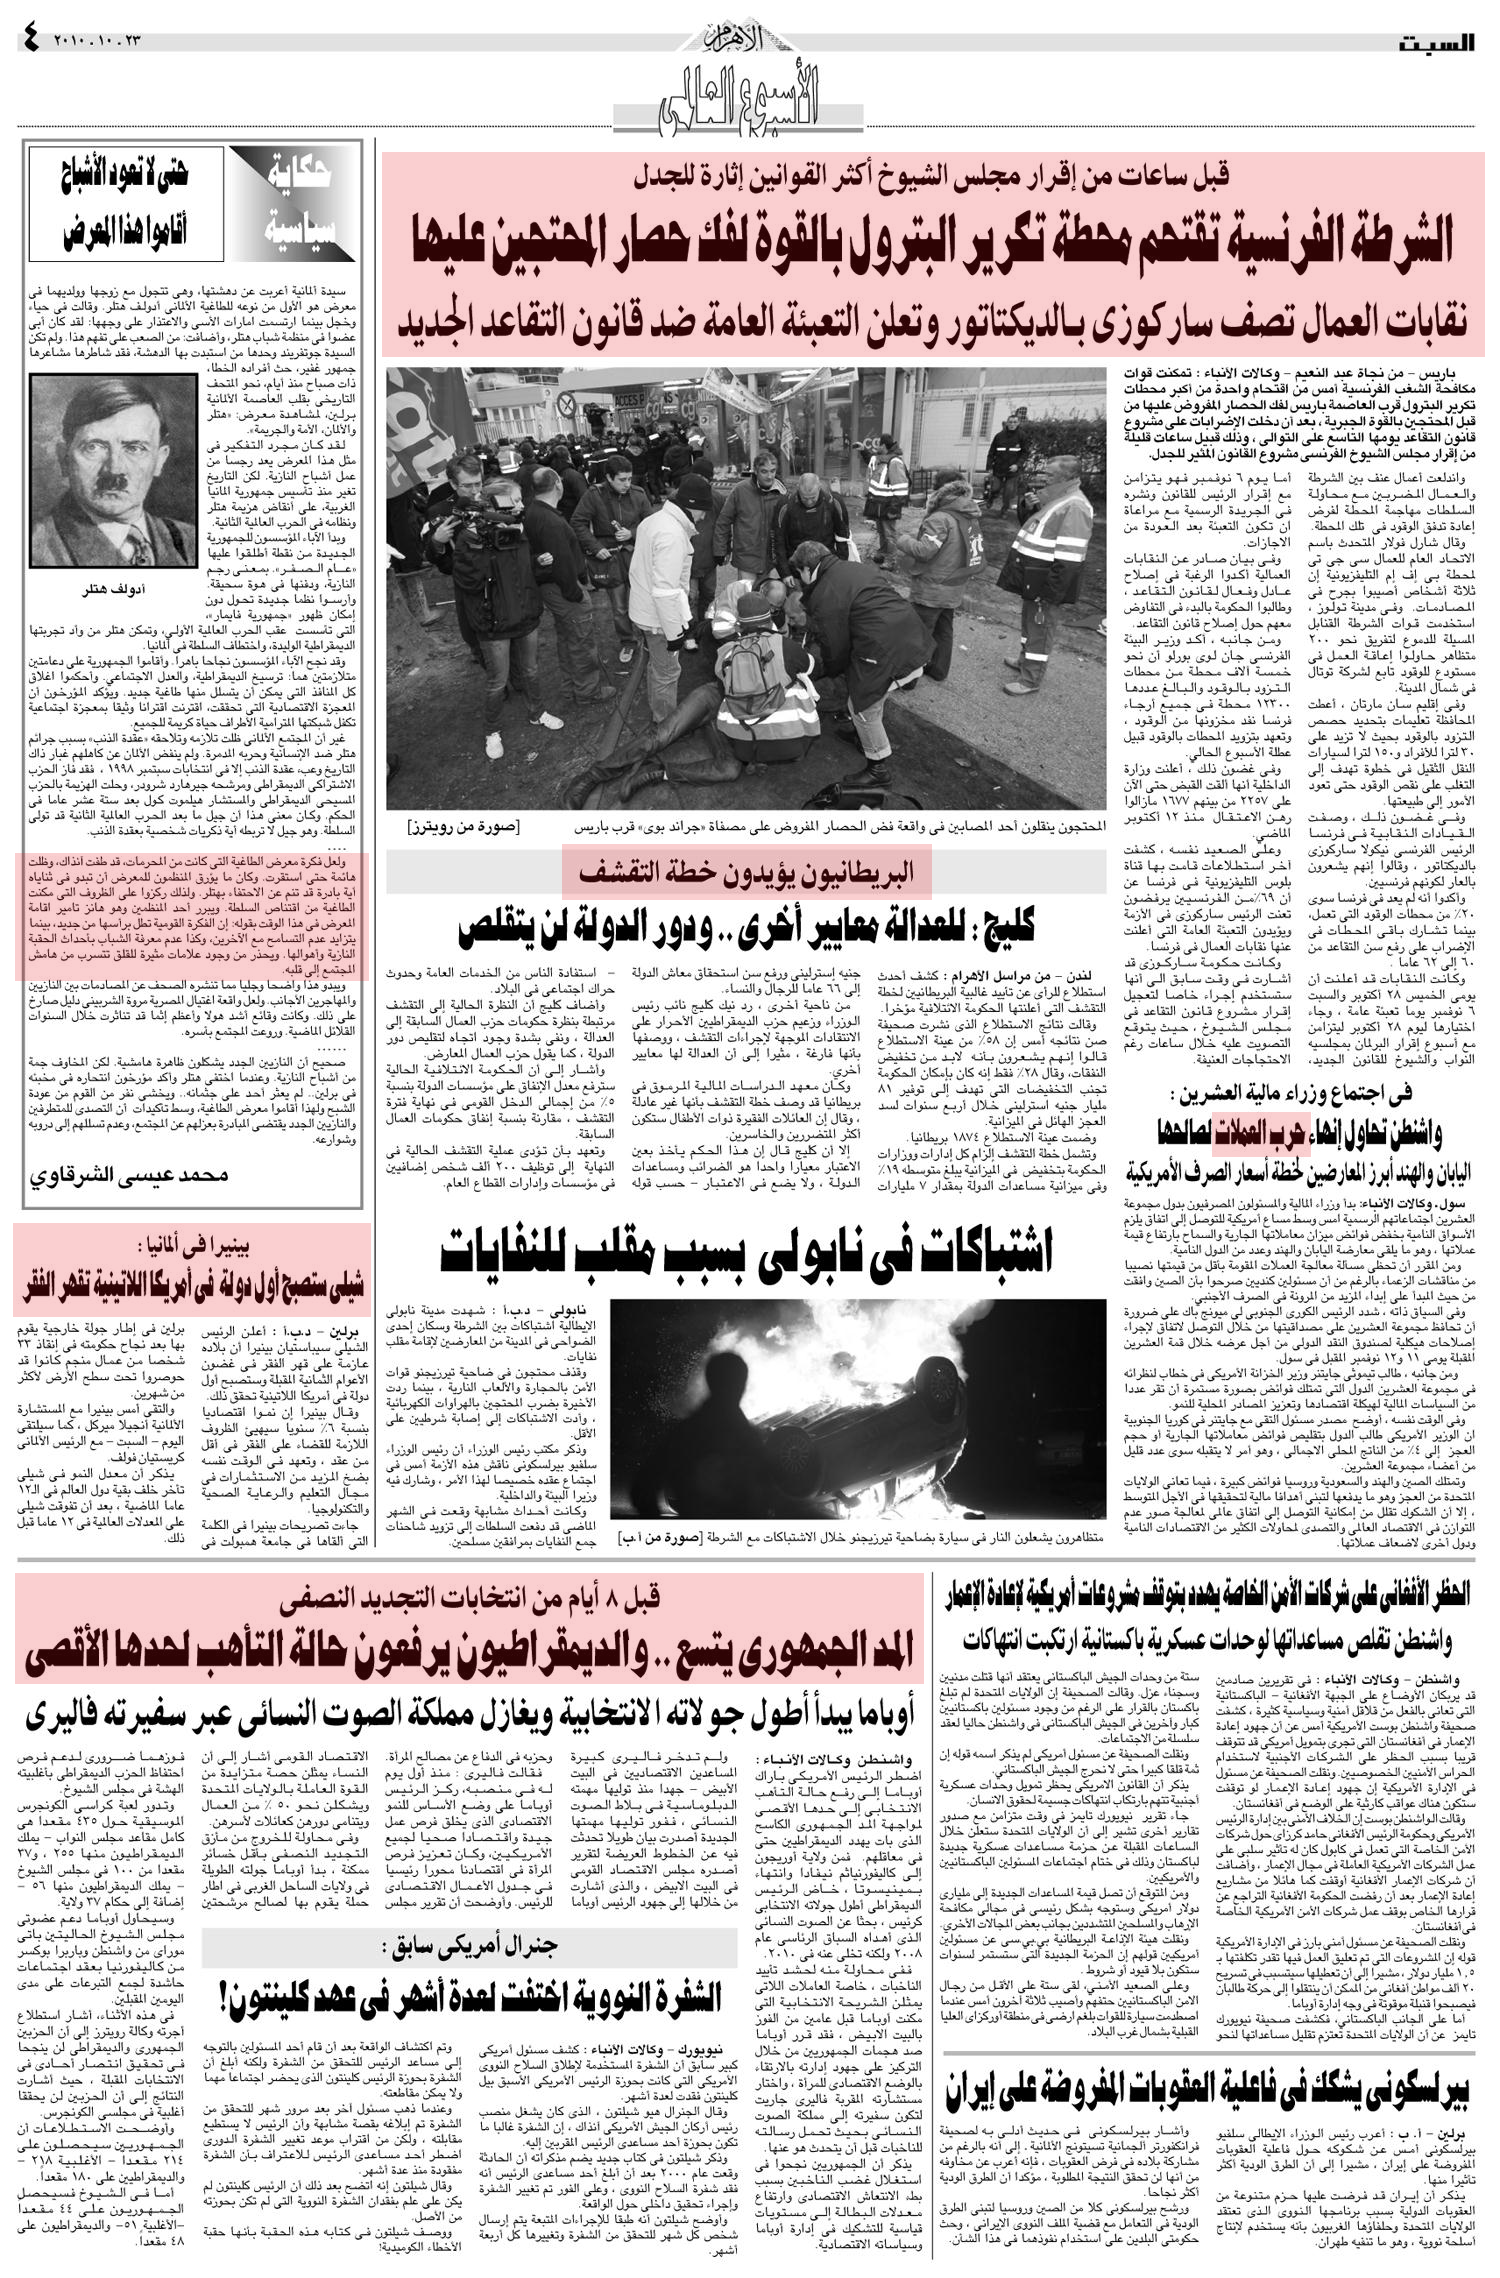 Some great world news as reported on page 4 of the Egyptian daily Al-Ahram, October 23, 2010.